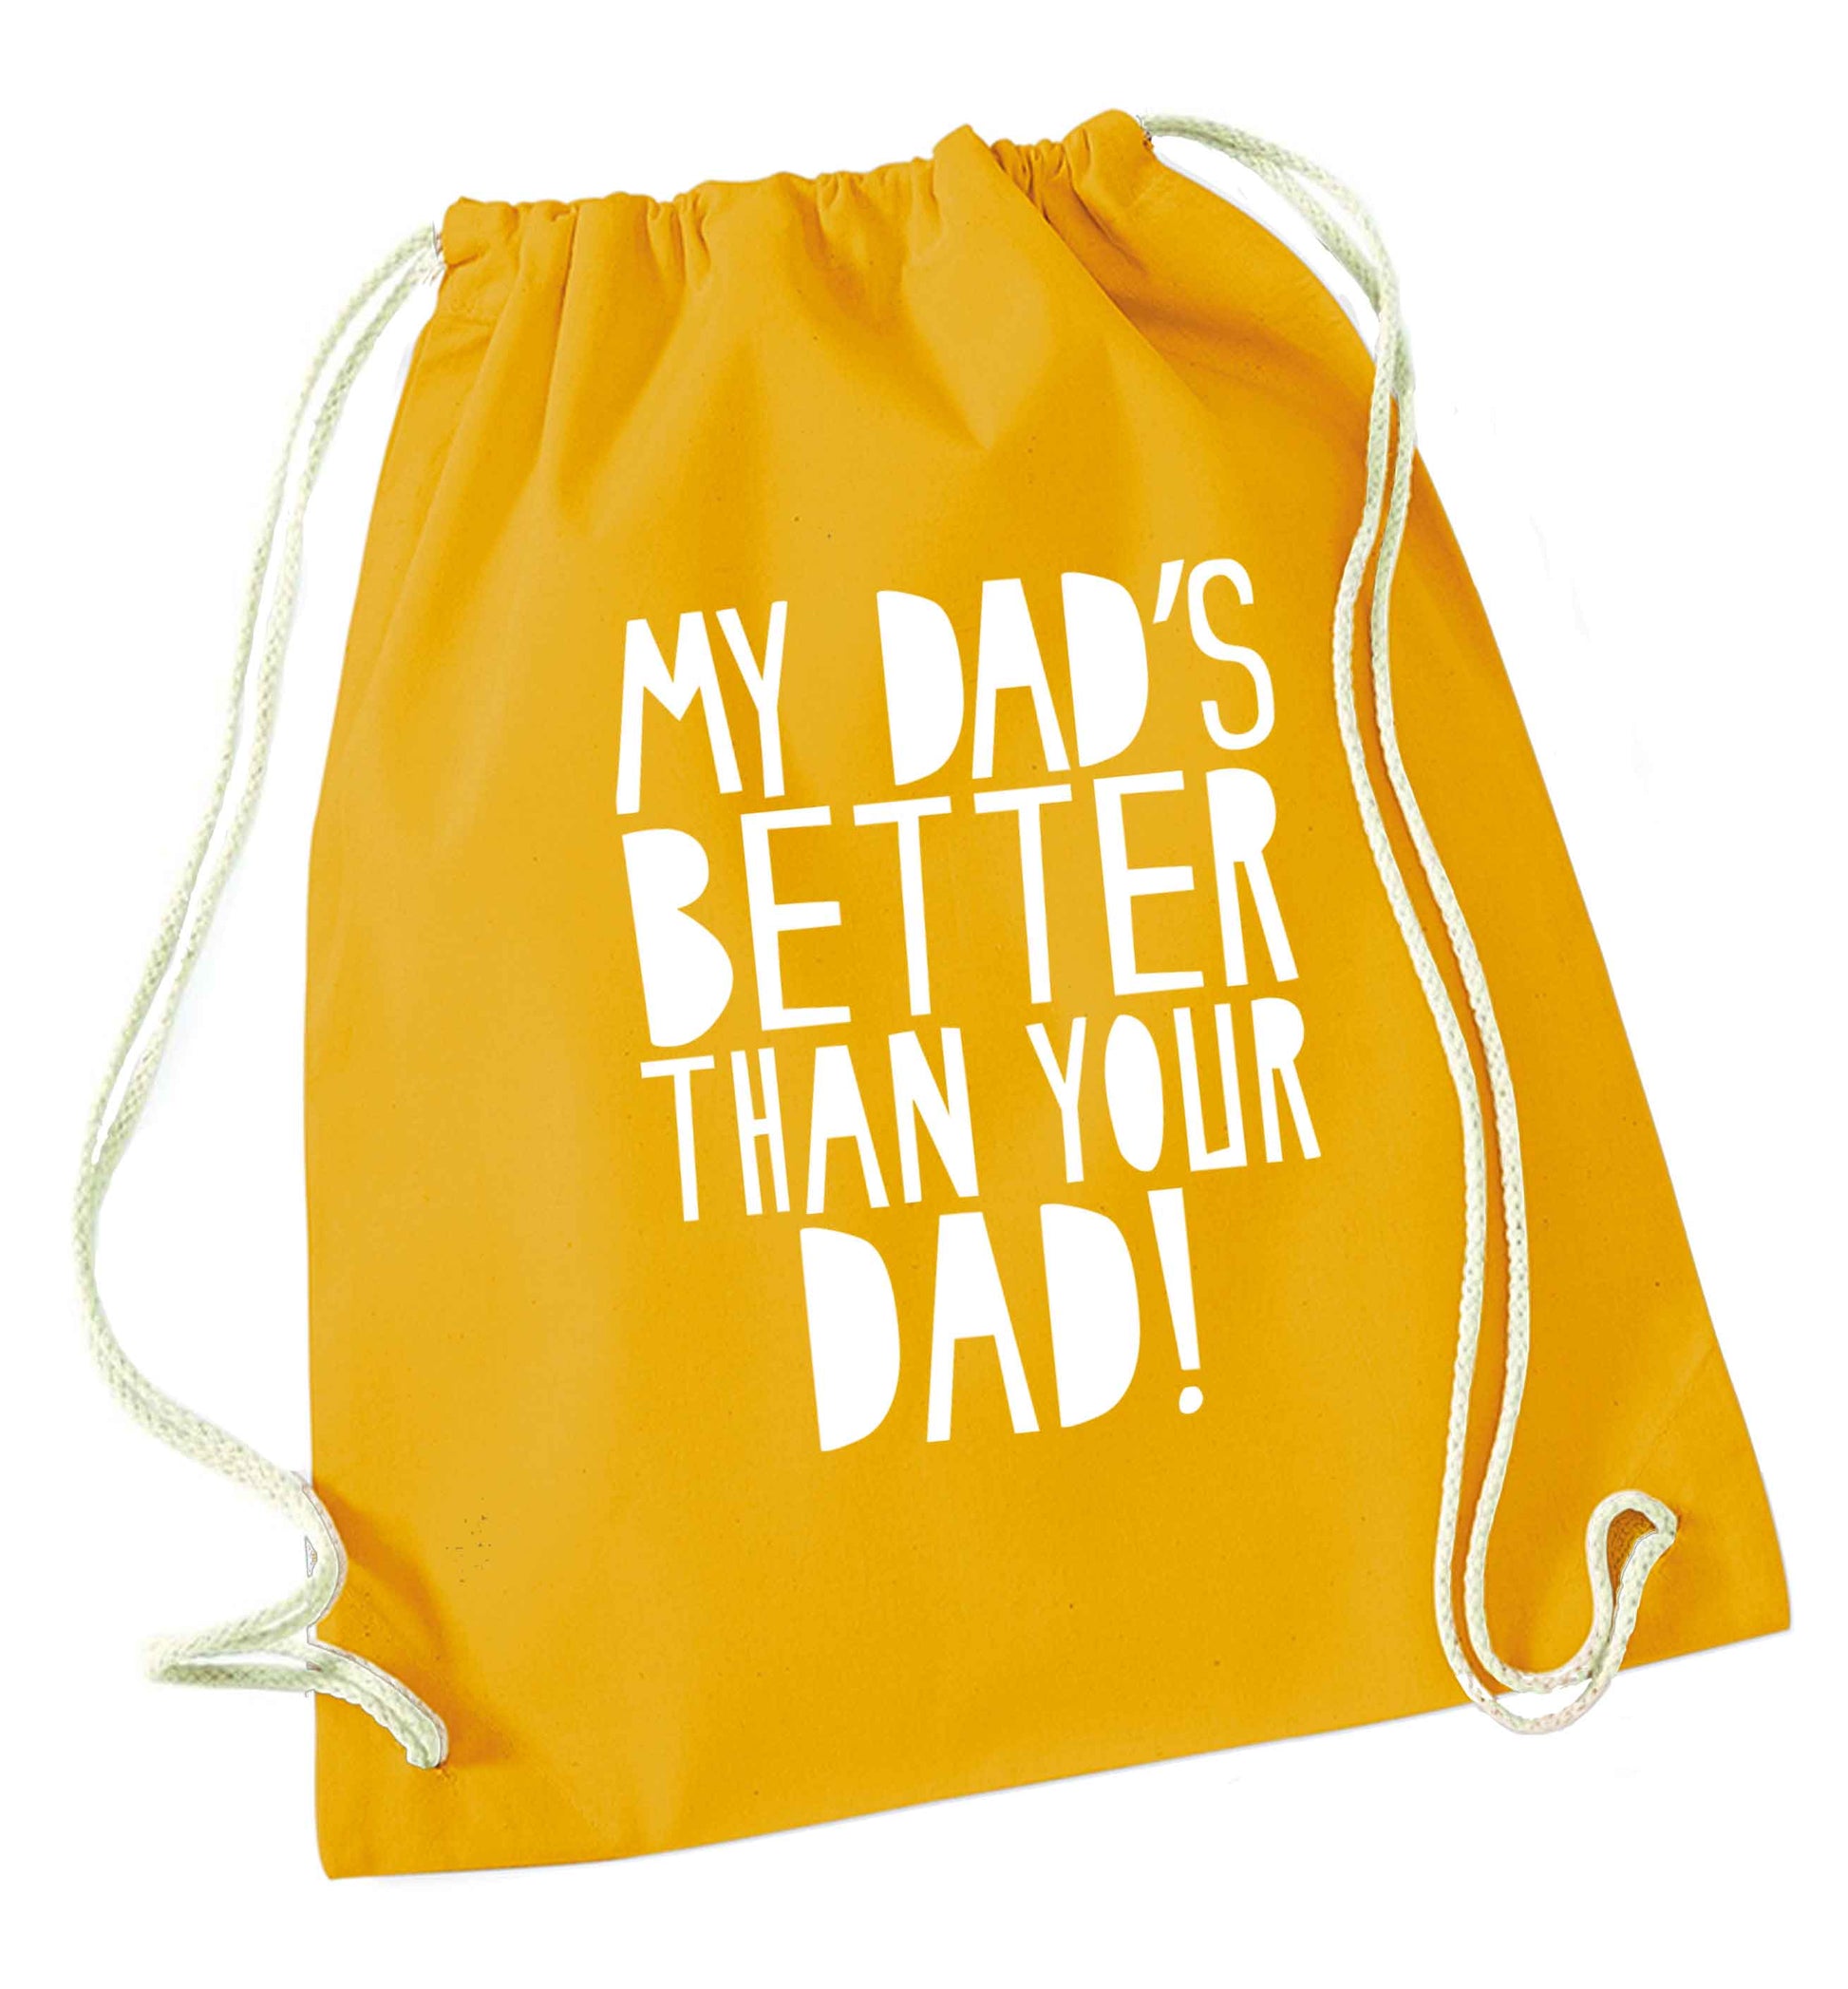 My dad's better than your dad! mustard drawstring bag